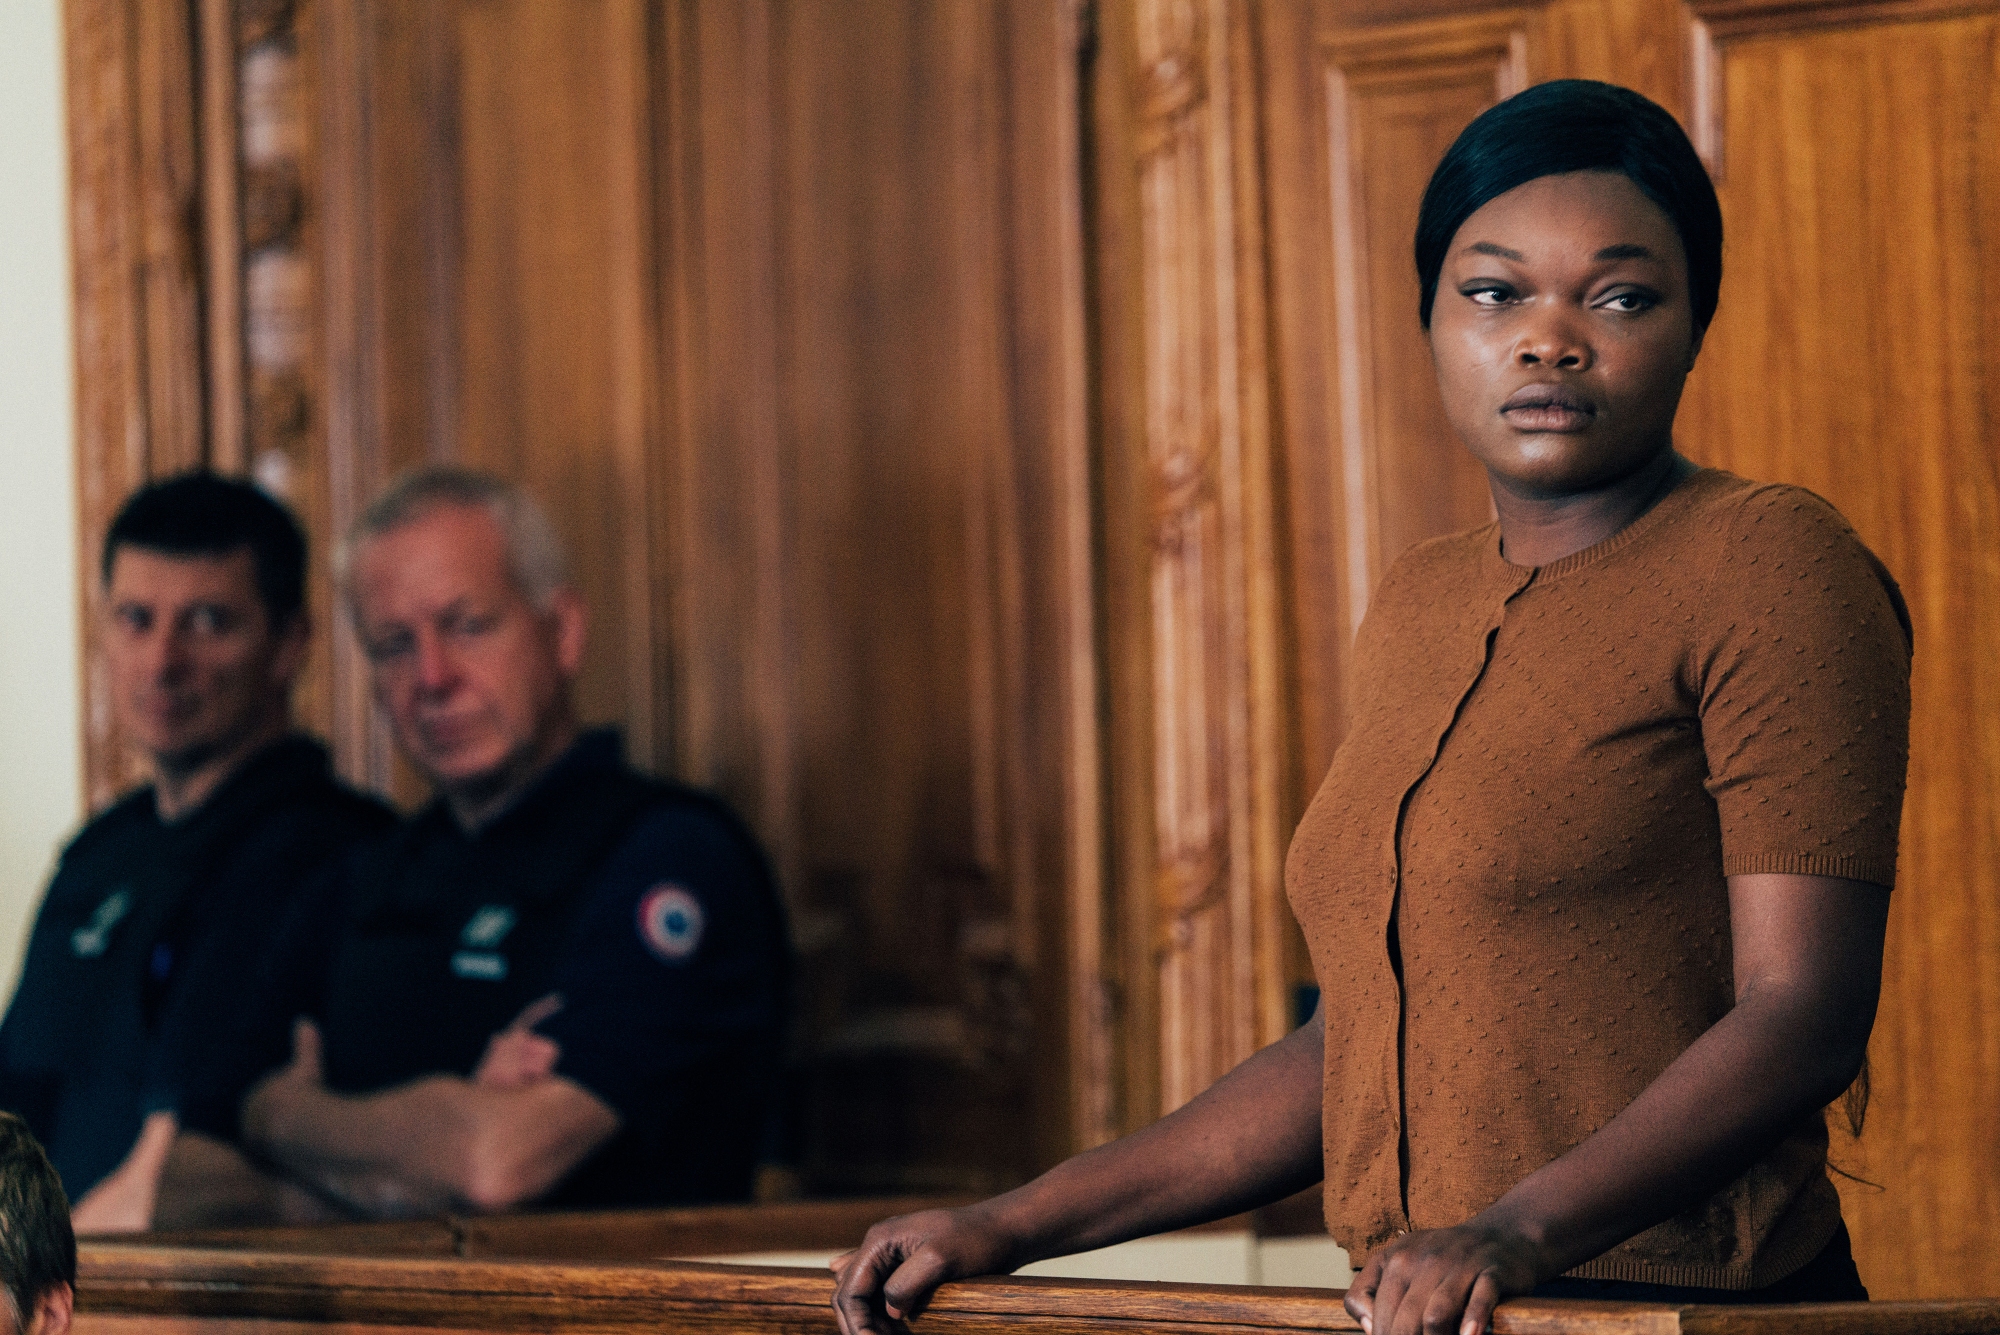 'Saint Omer' Guslagie Malanga as Laurence Coly standing at the court stand during a trial looking to the side. She's wearing a brown top. Two security guards look at her from the corner of the room.